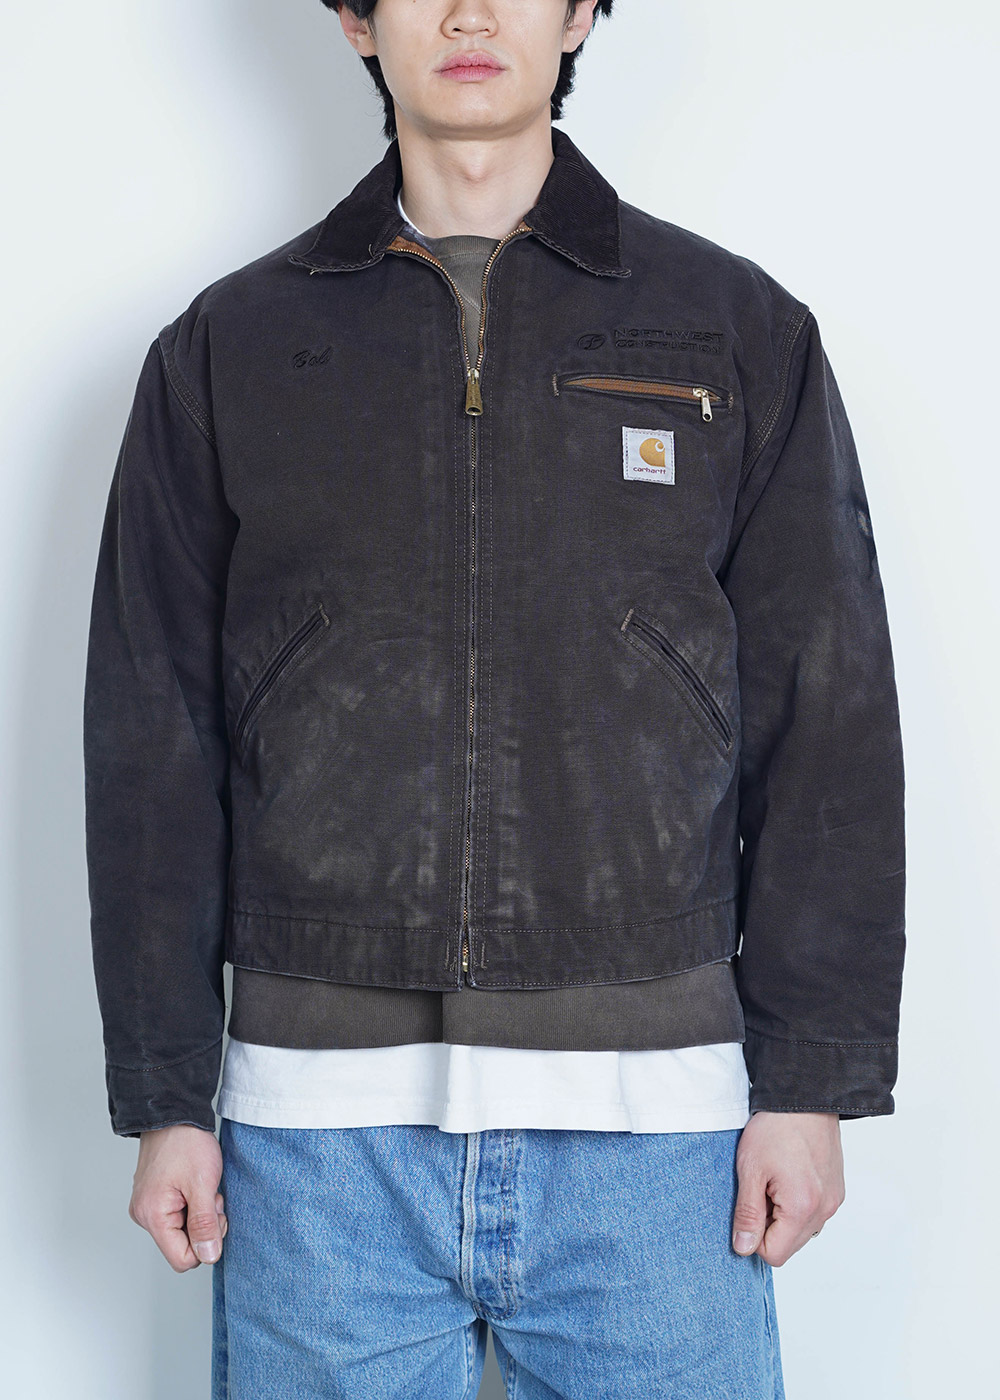 reproduction 055 / carhartt (Overdyed)